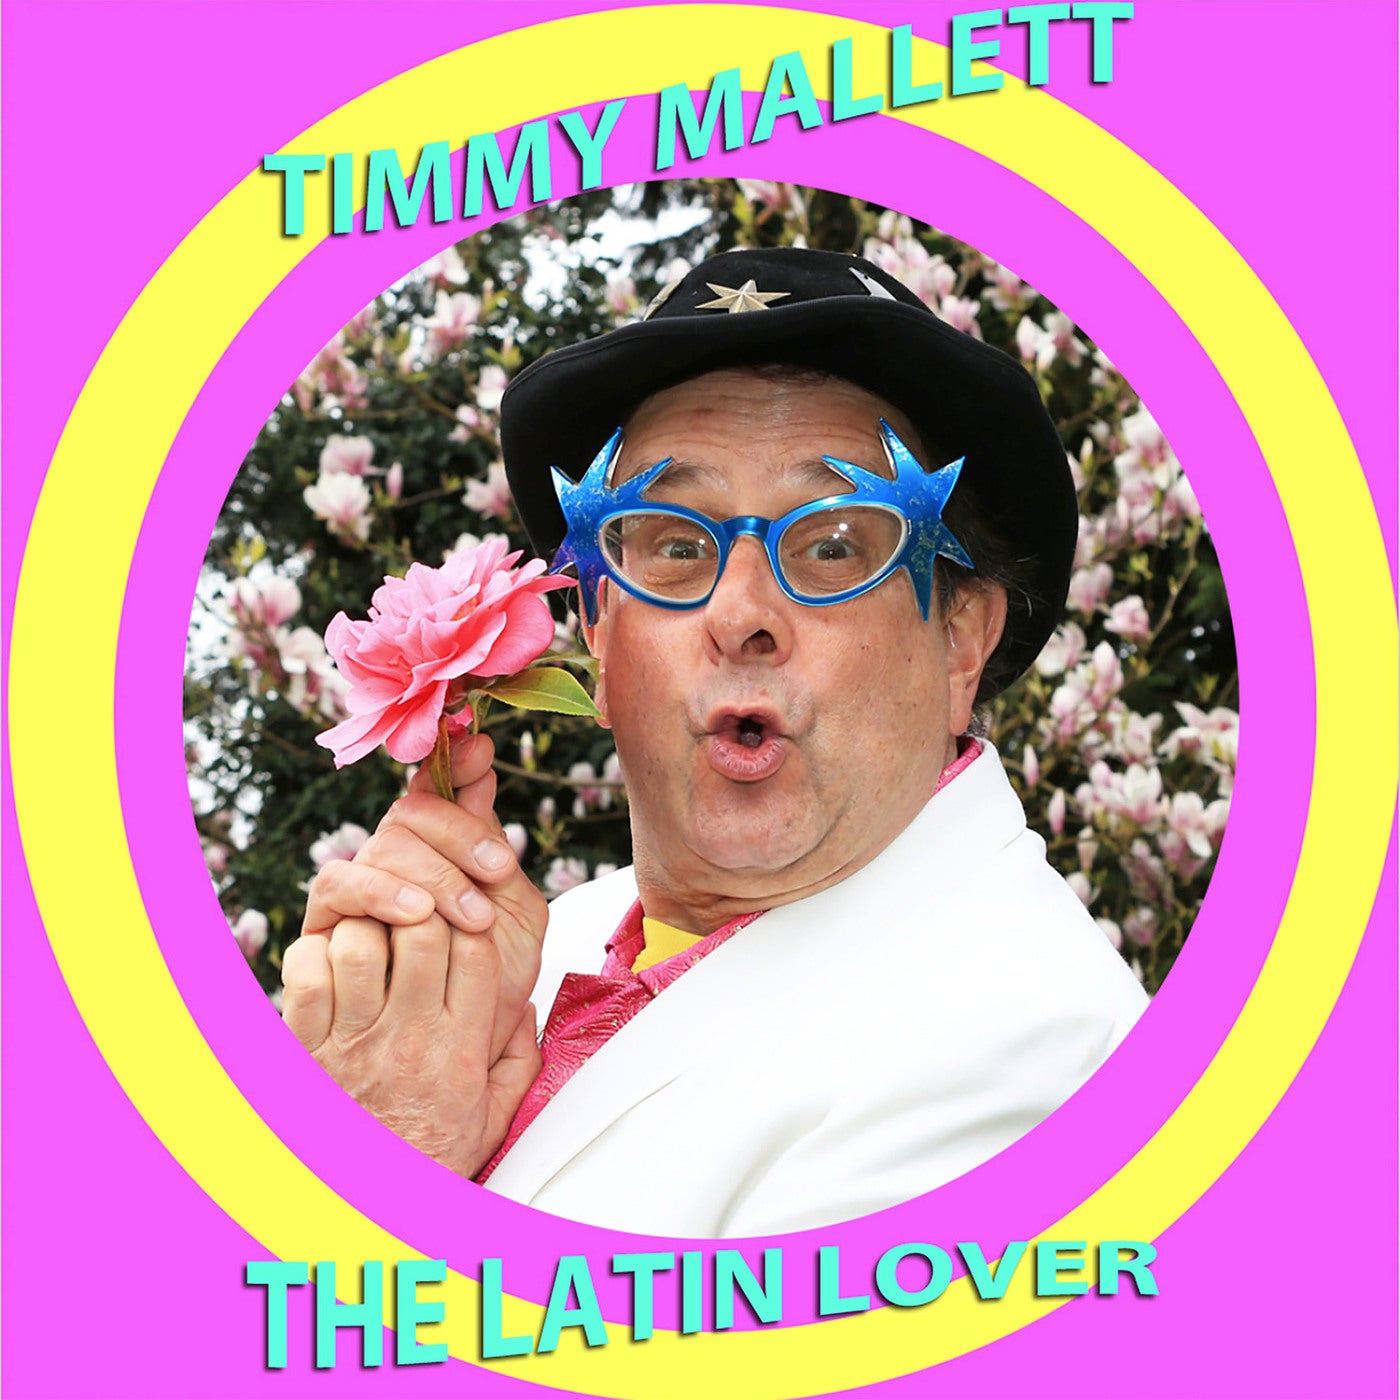 The Latin Lover